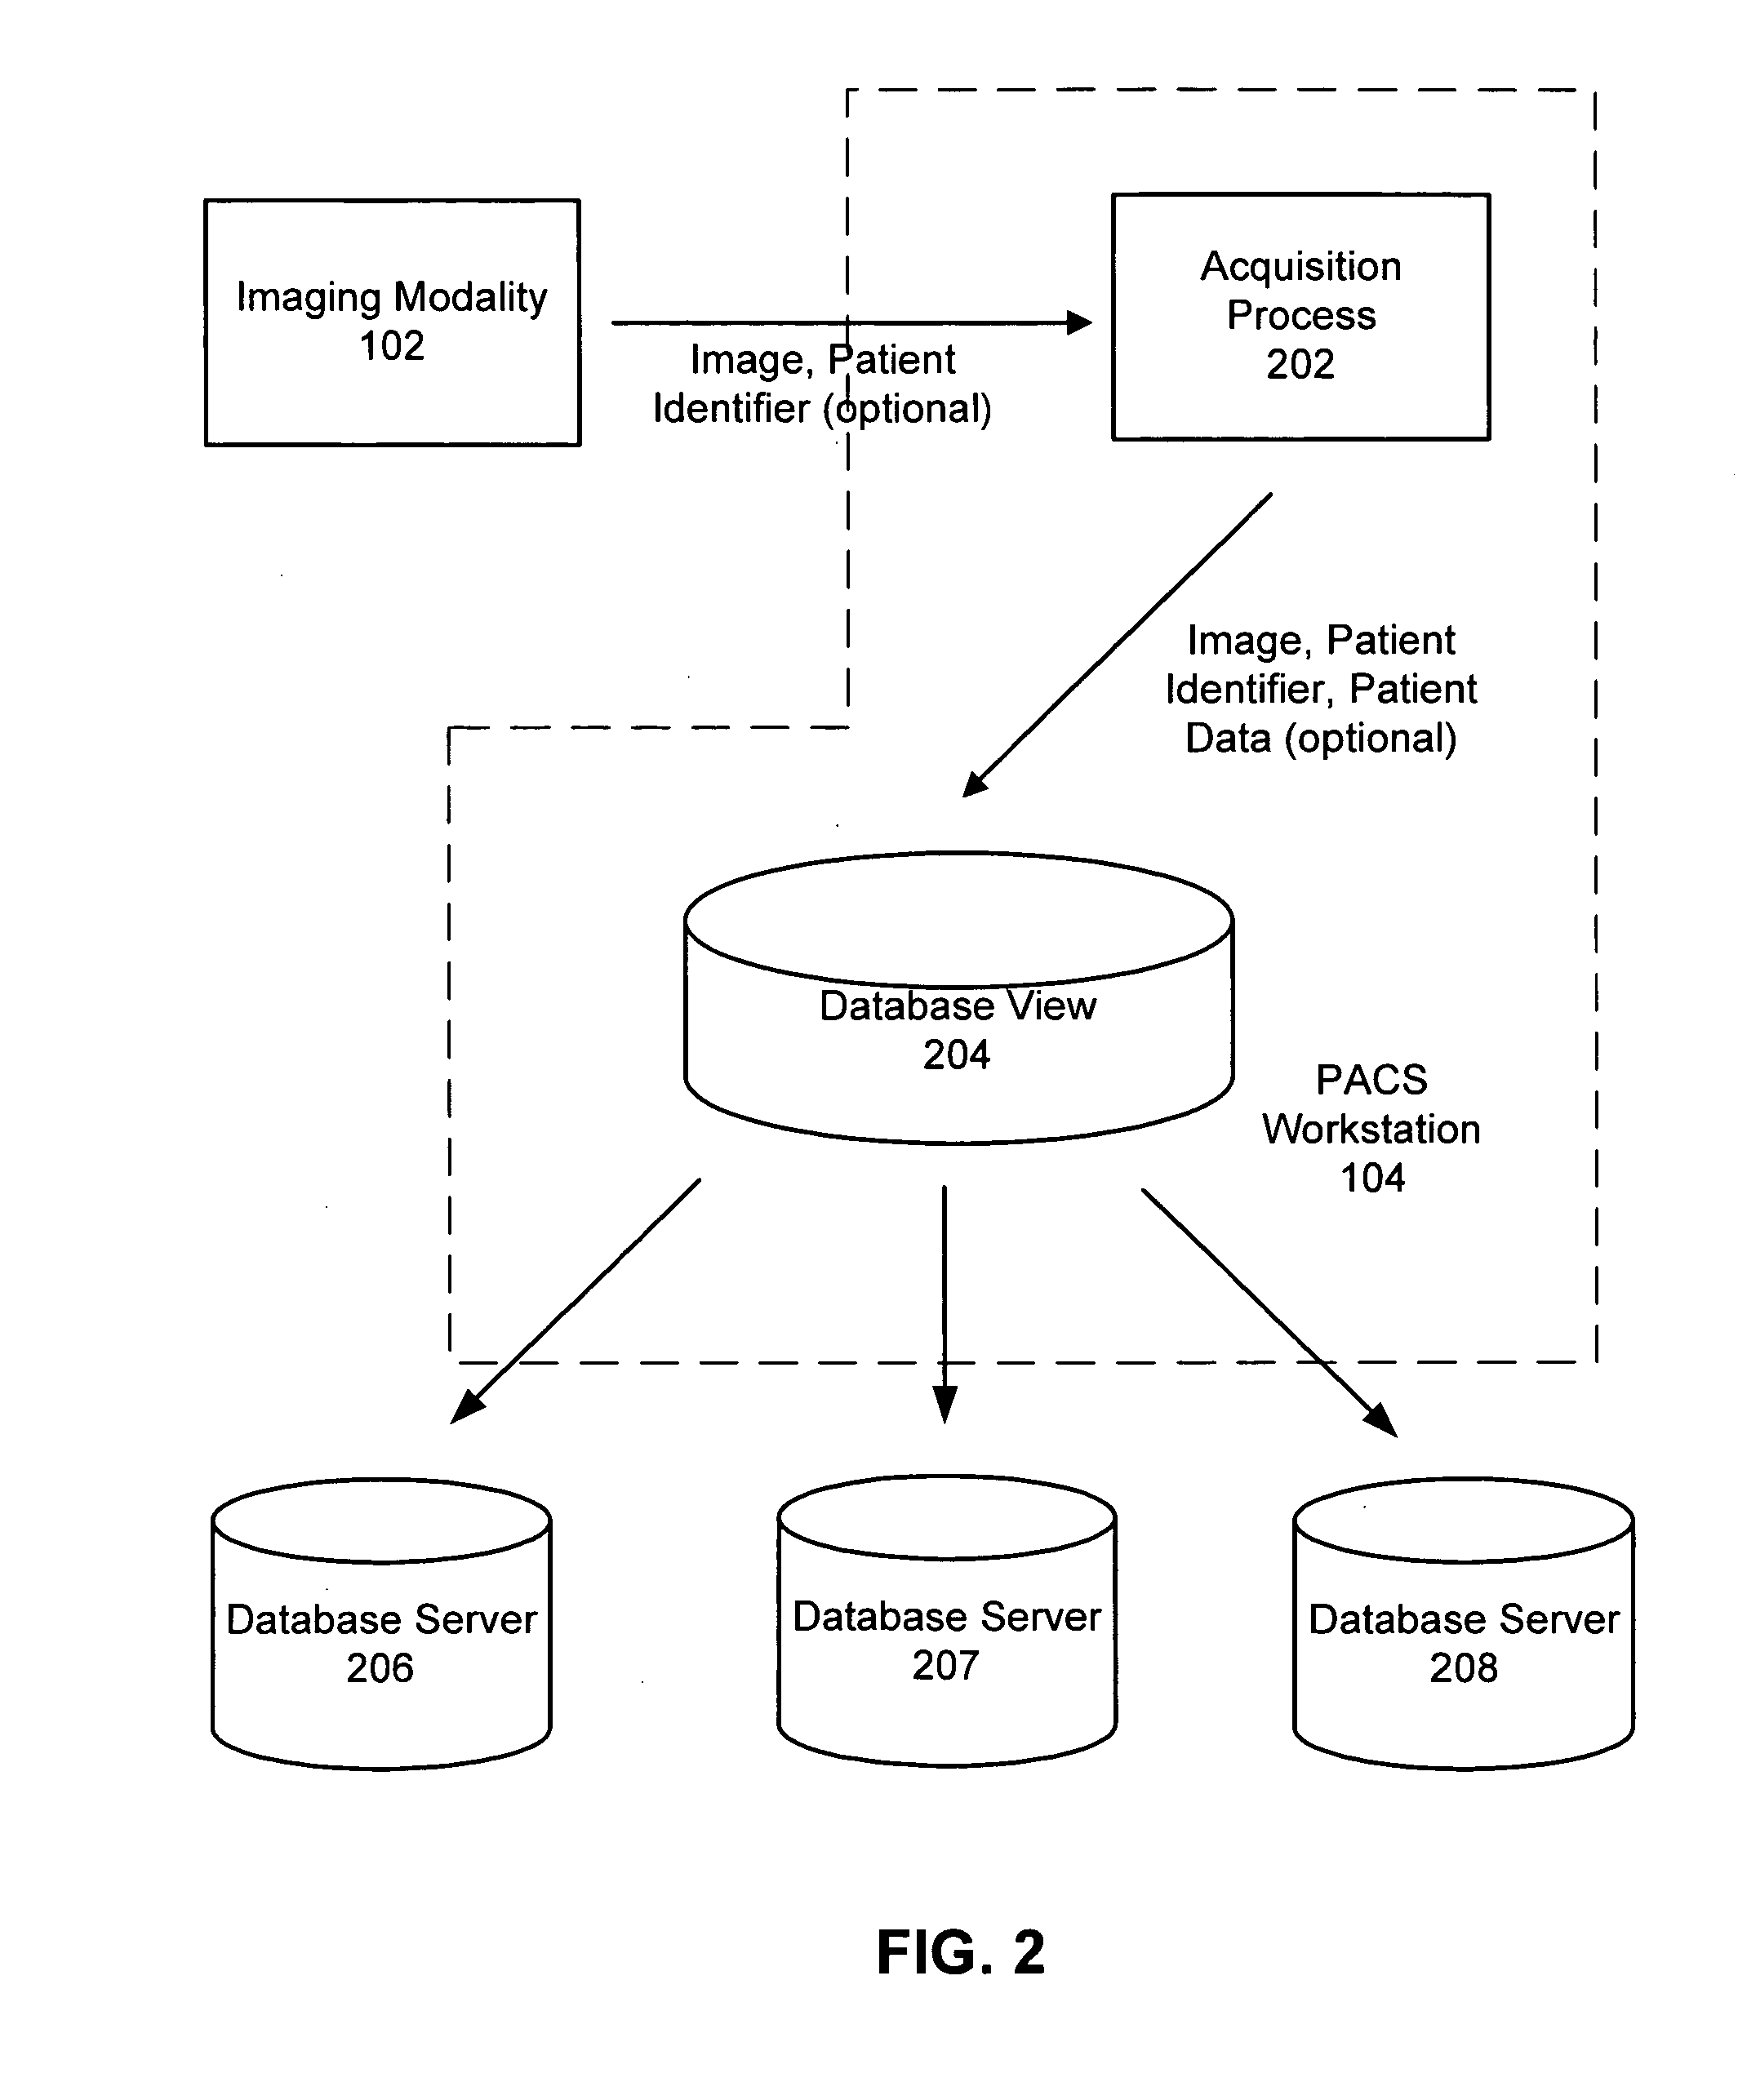 Transactional storage and workflow routing for medical image objects